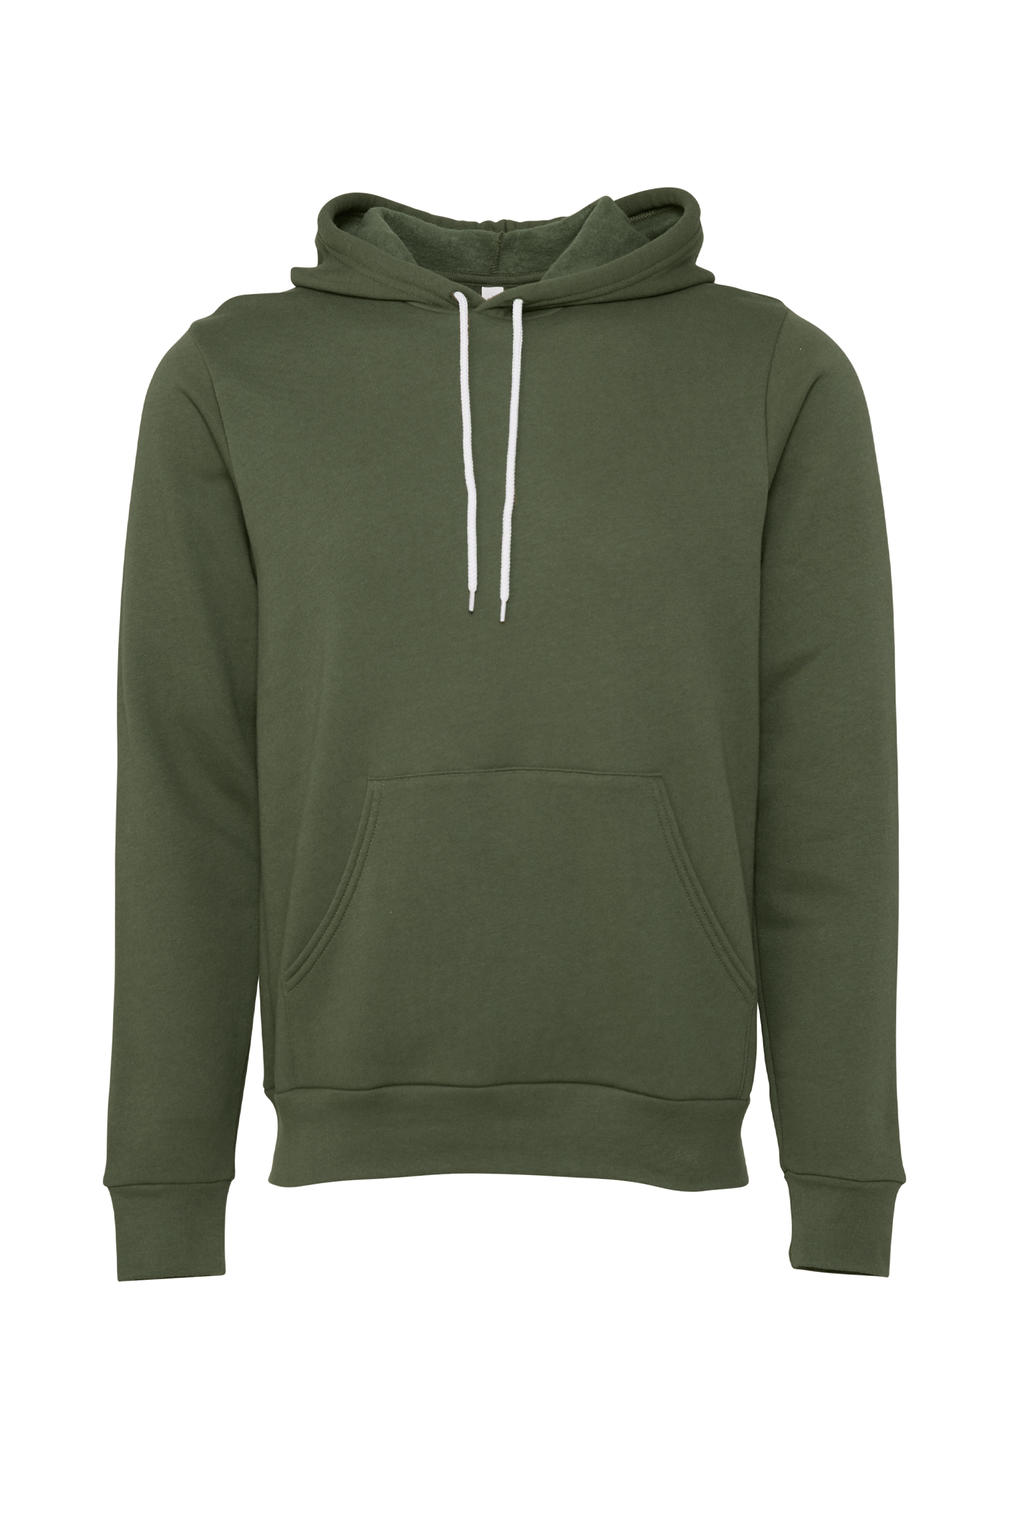  Unisex Poly-Cotton Pullover Hoodie in Farbe Military Green